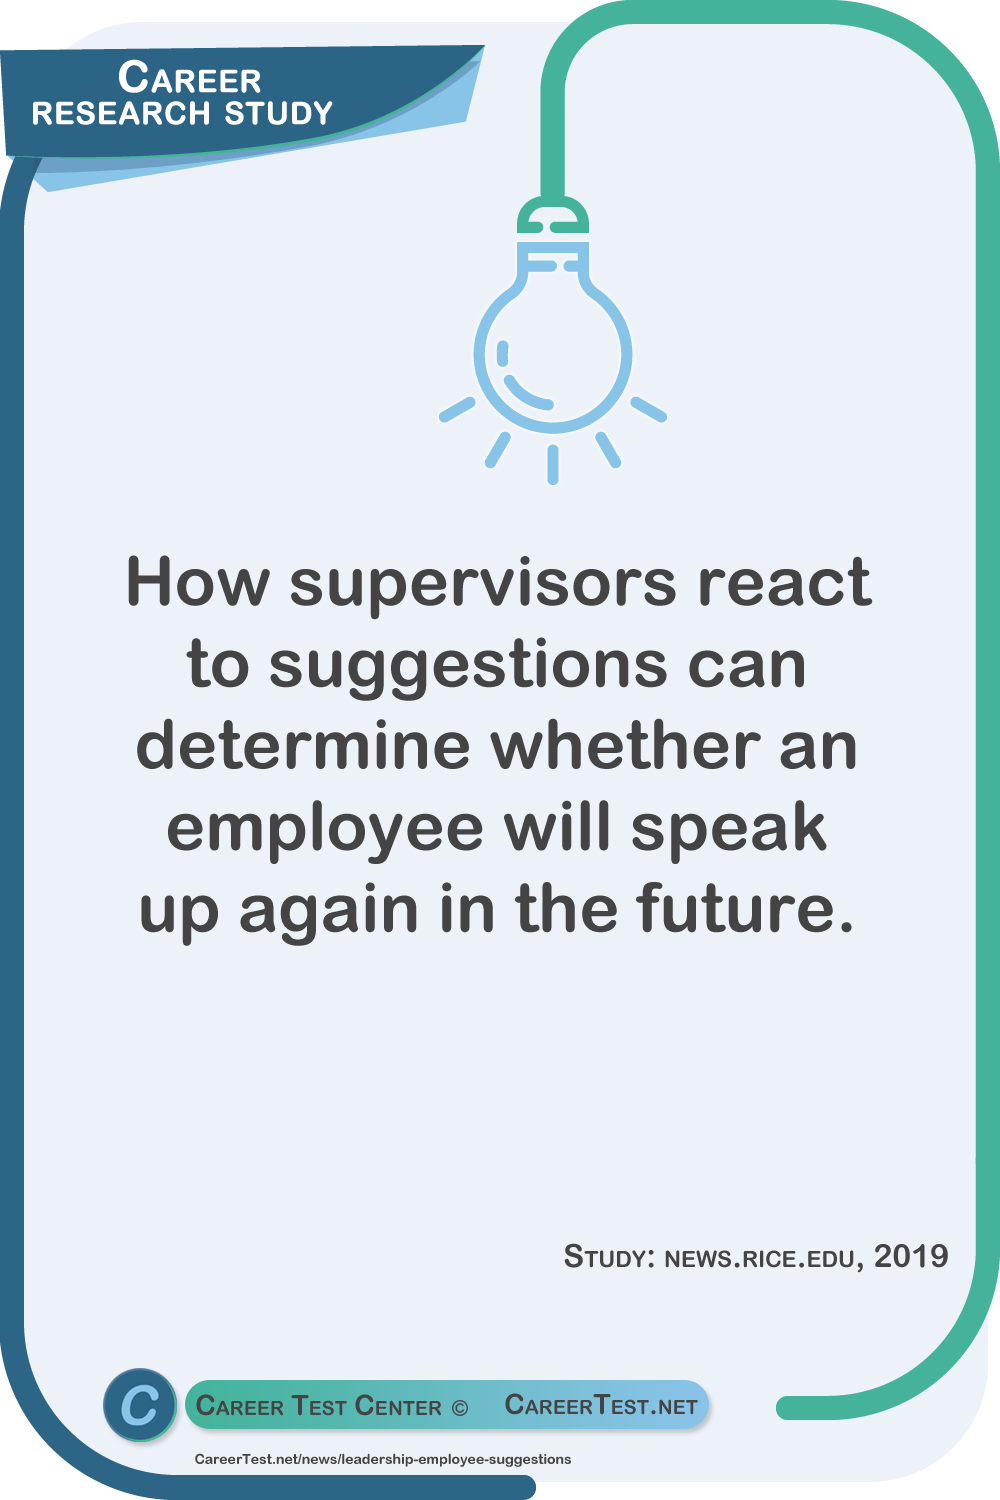 How supervisors react to suggestions can determine whether an employee will speak up again in the future. Study: news.rice.edu, 2019.